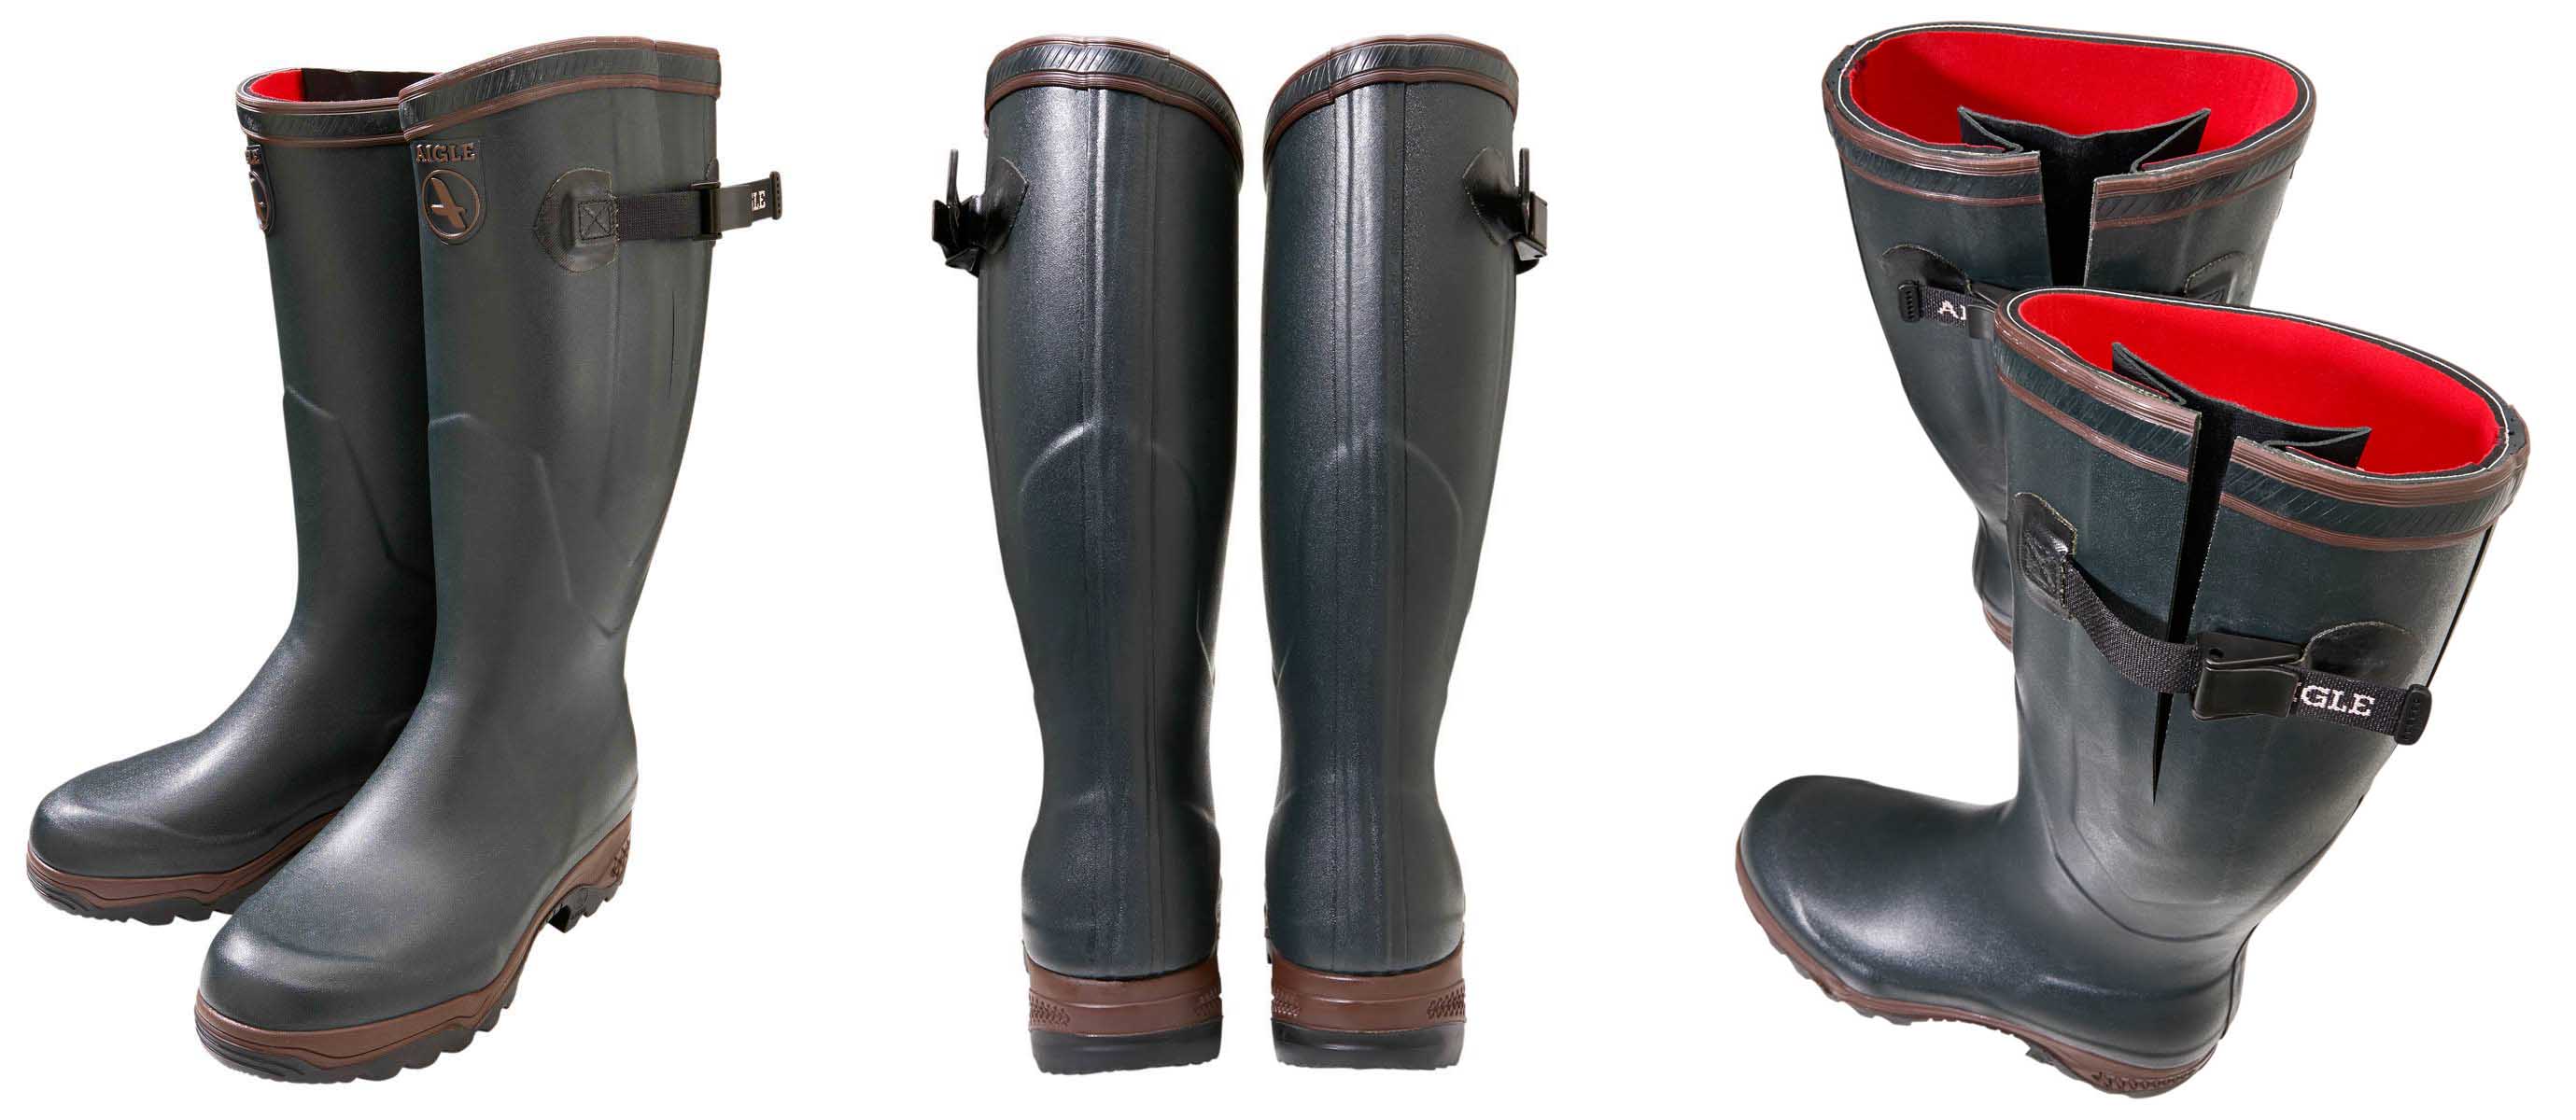 Insister praktisk selvbiografi Aigle Boots | Our Guide to Aigle Wellies